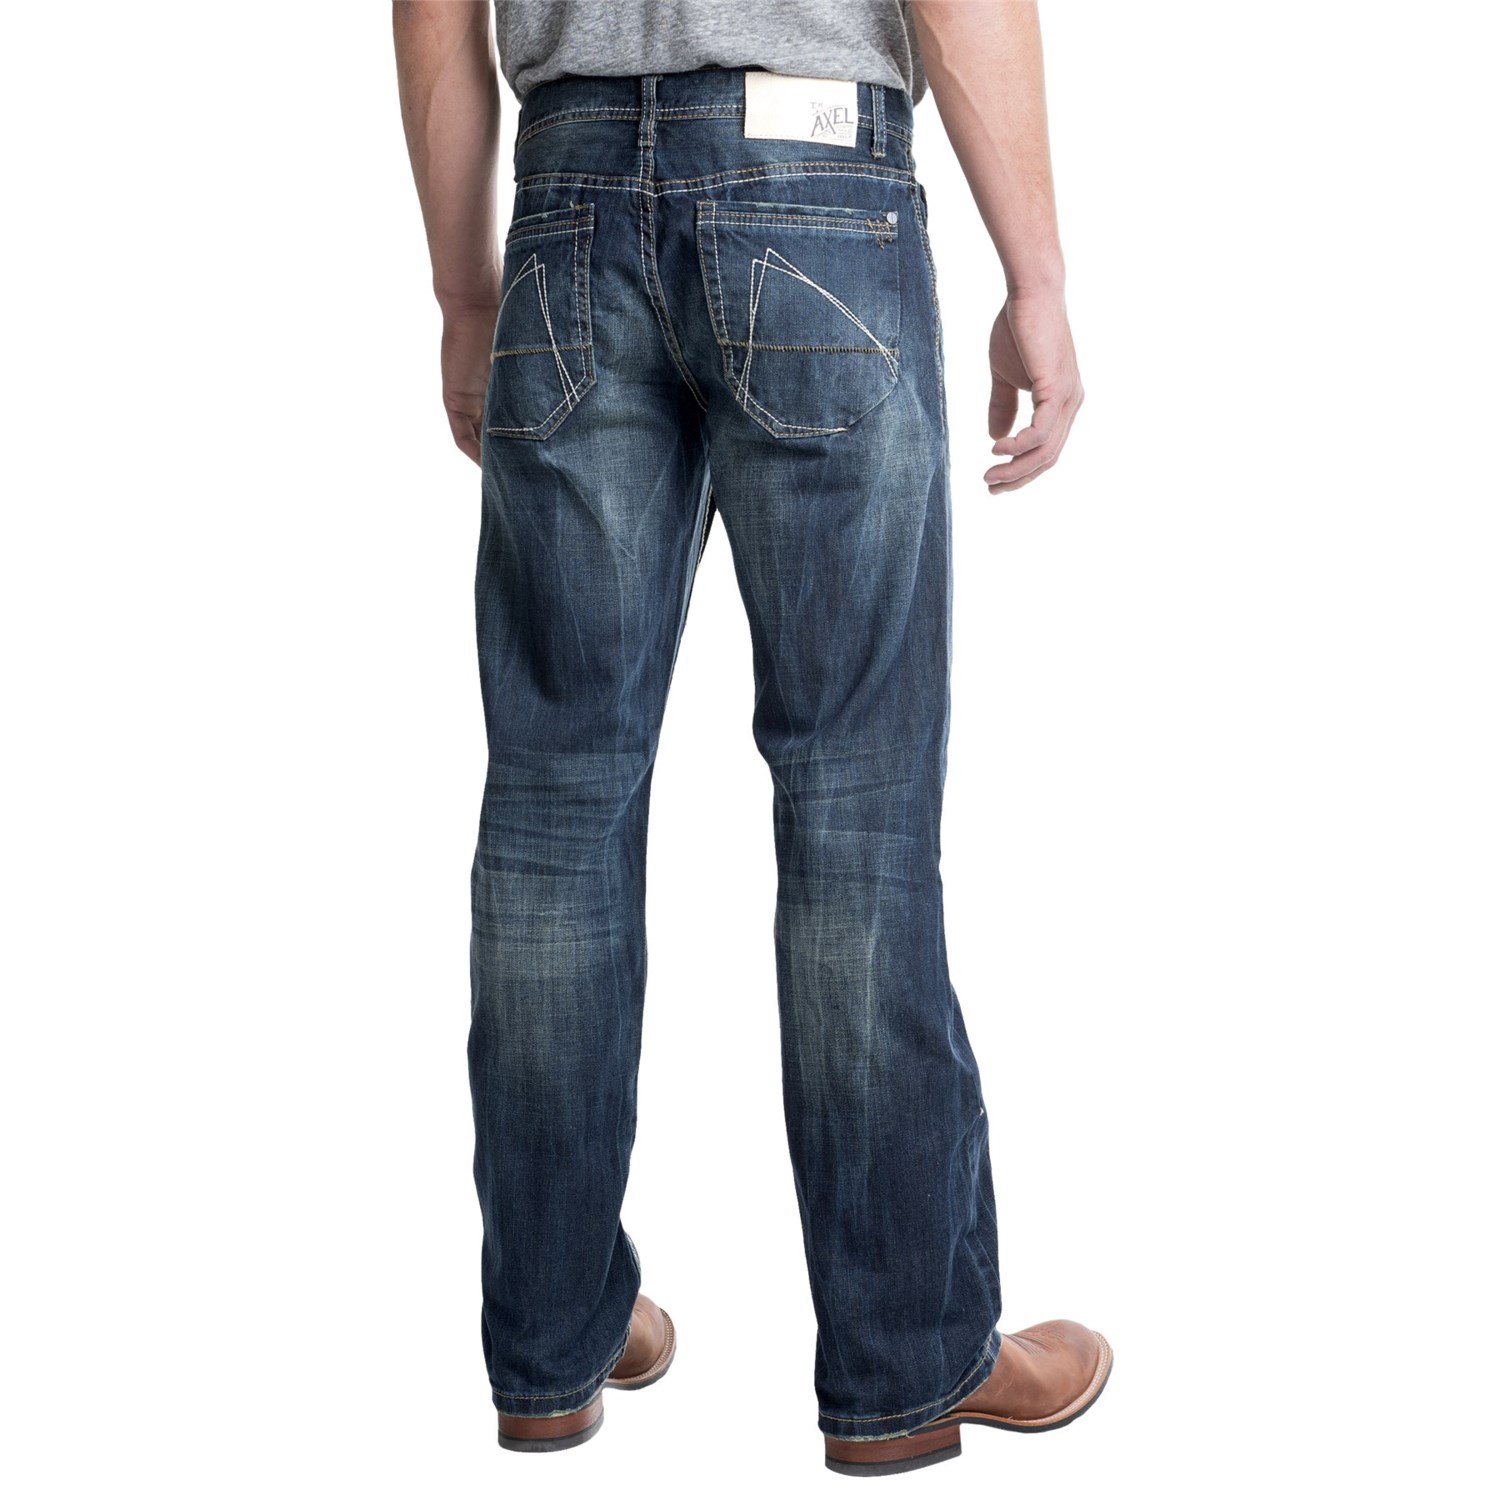 Axel Baltic Jeans (For Men) - Save 60%